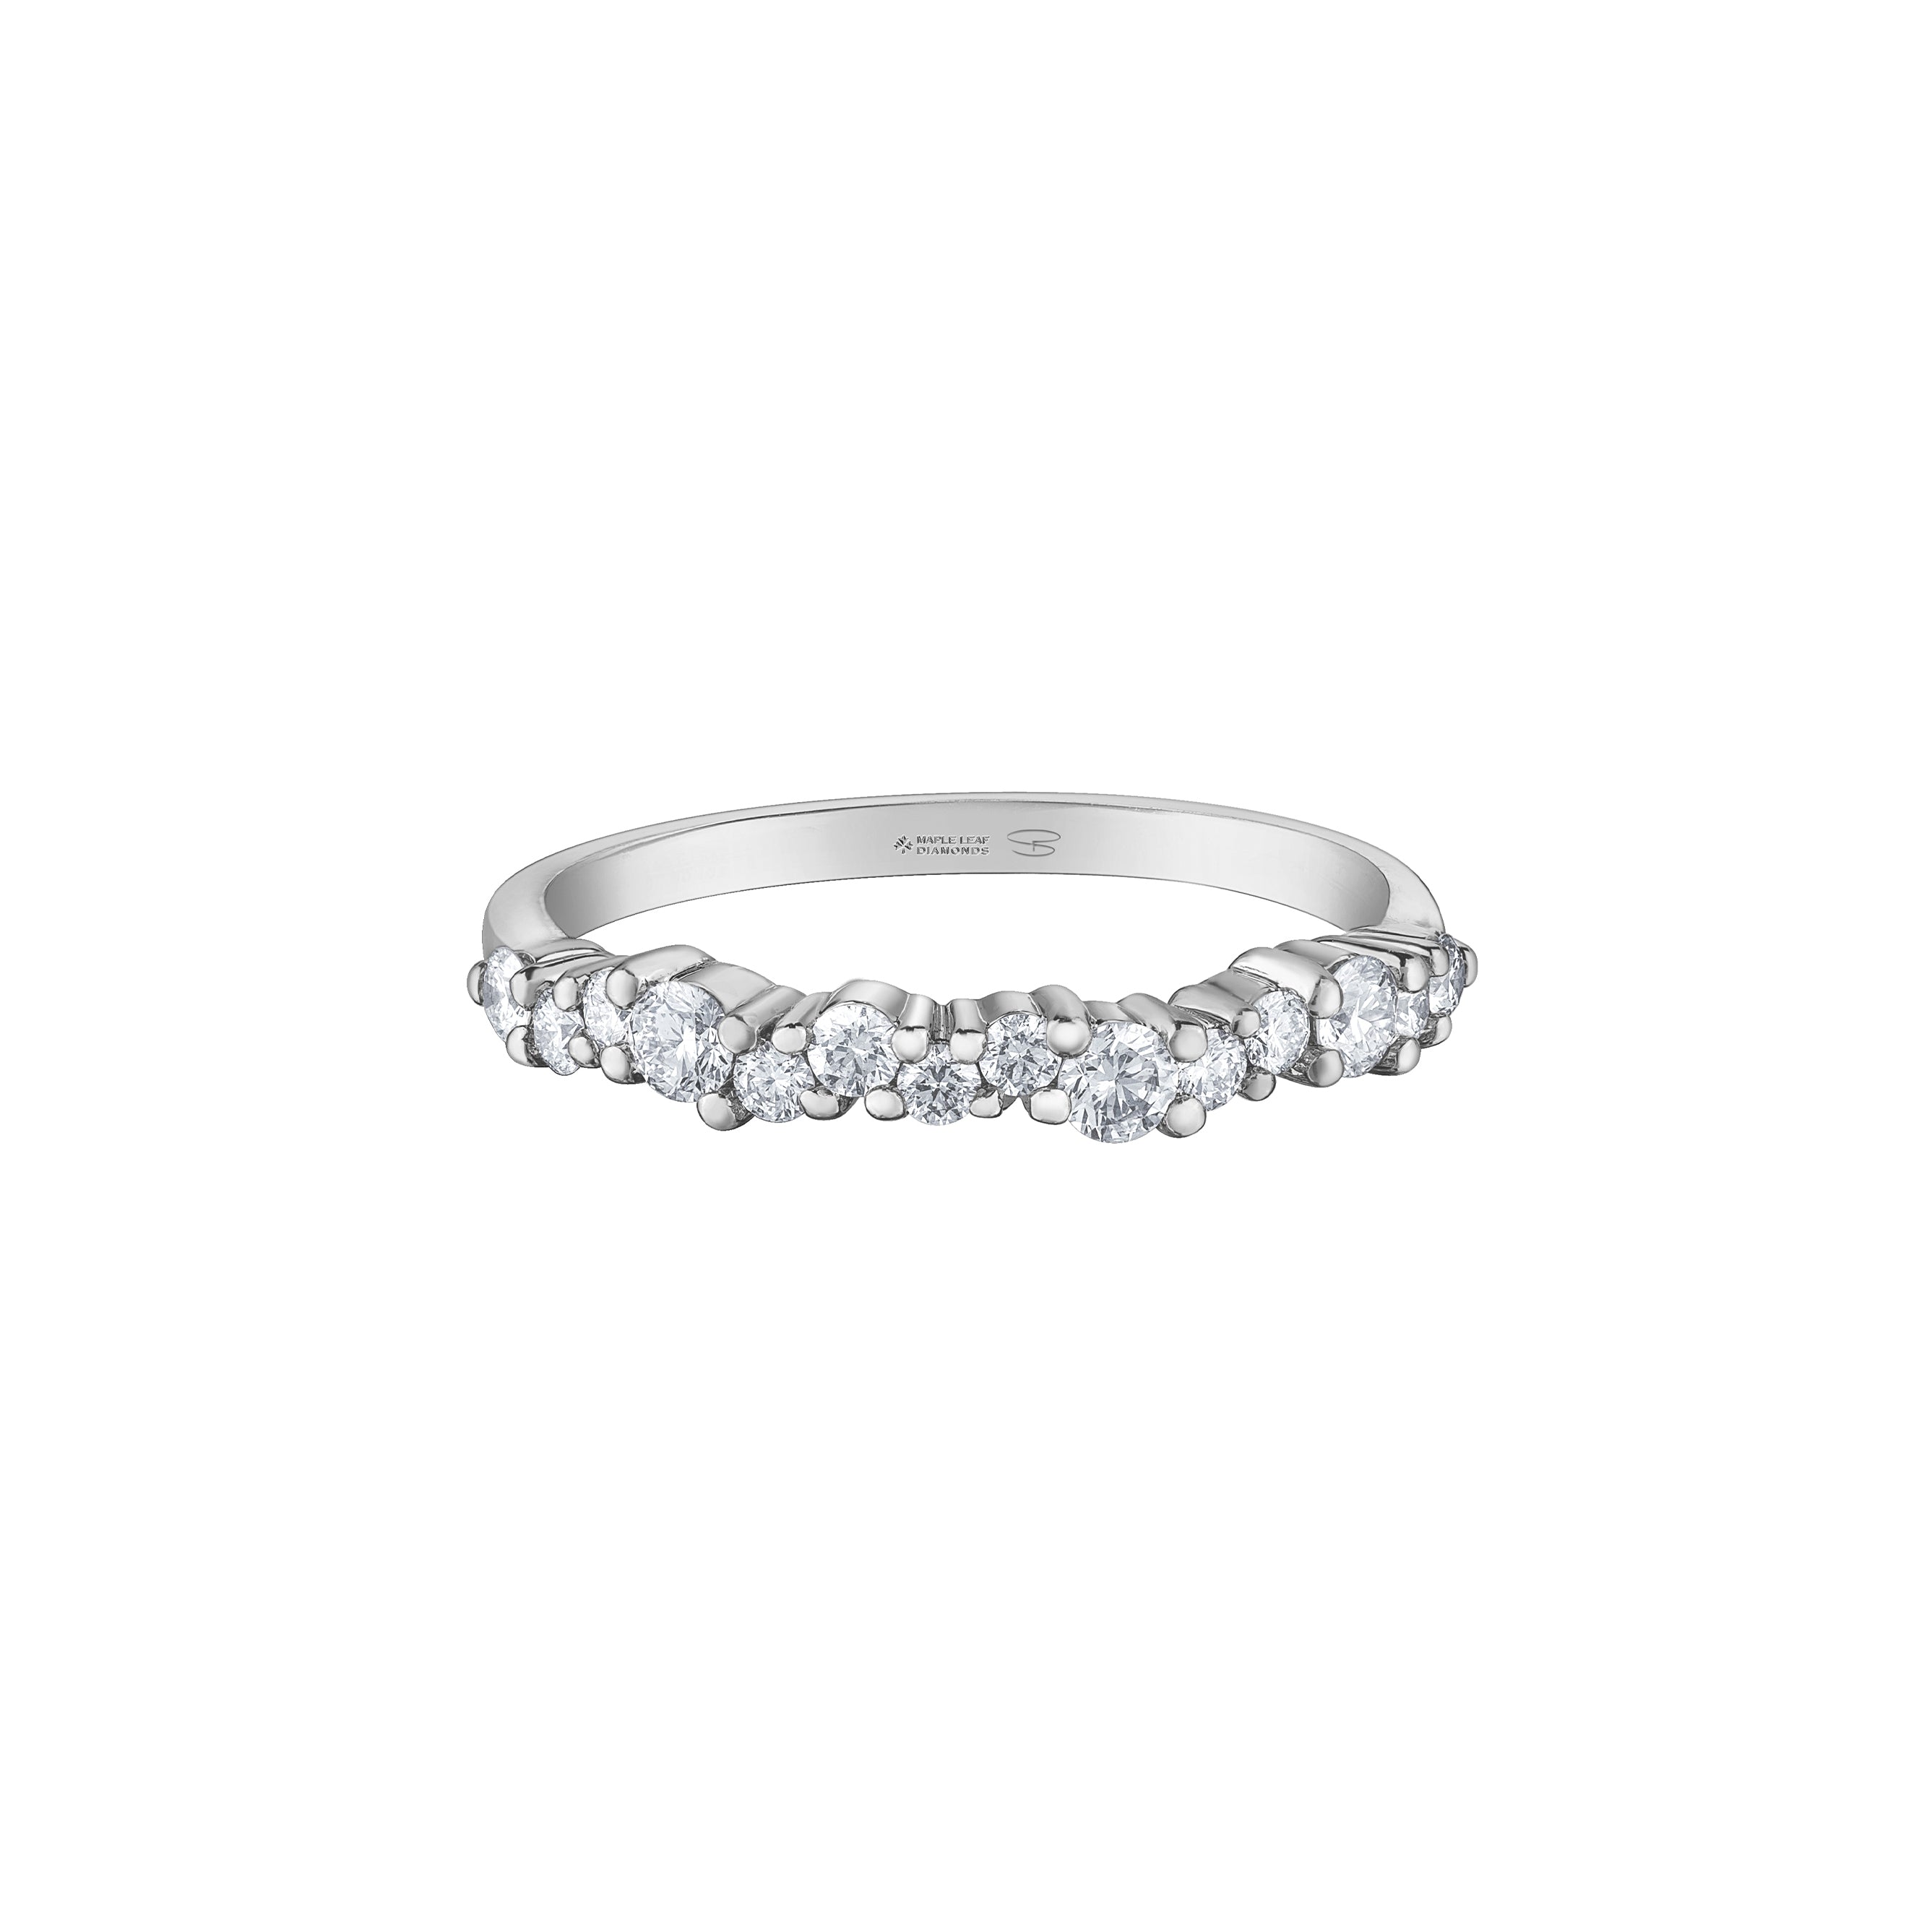 Crafted in white 14KT Canadian Certified Gold, this ring features fourteen round brilliant cut Canadian diamonds